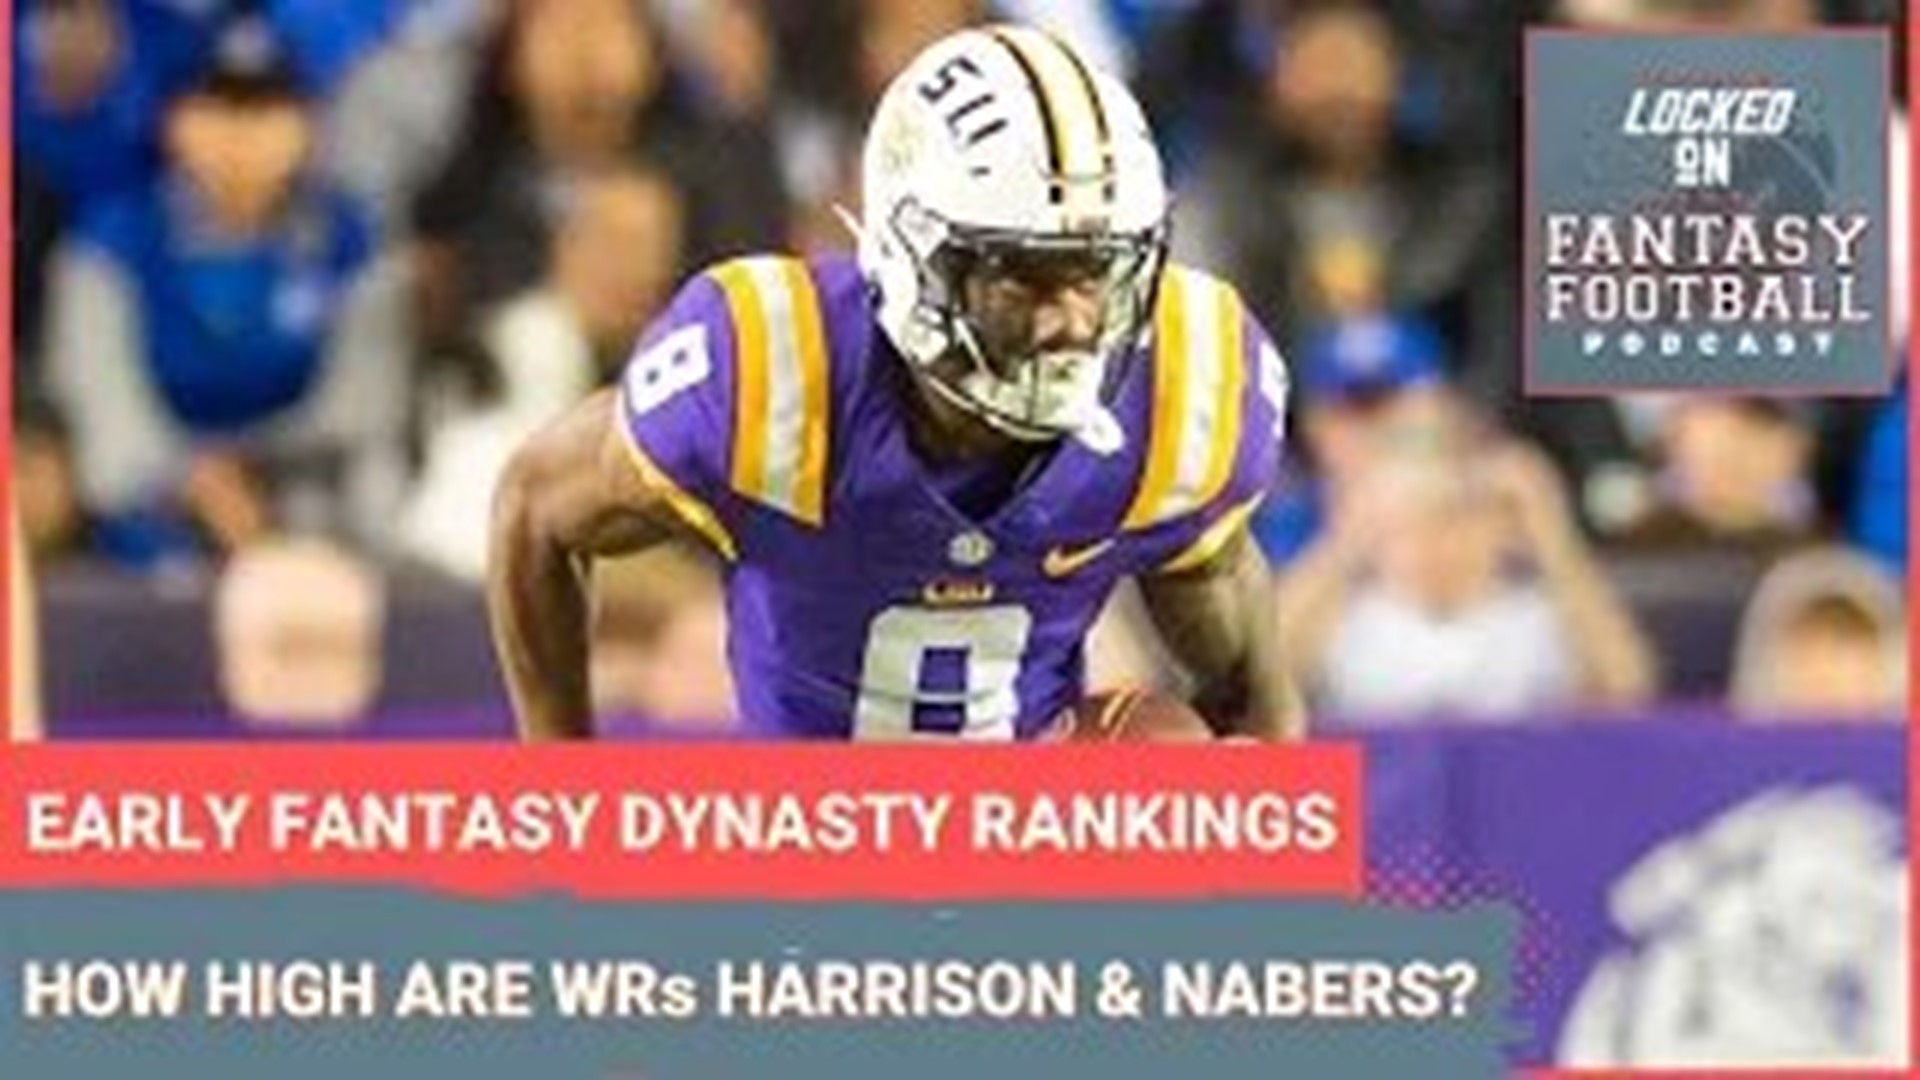 innie Iyer breaks down the early fantasy football rookie dynasty rankings based on the consensus of experts to find out where top wide receivers.